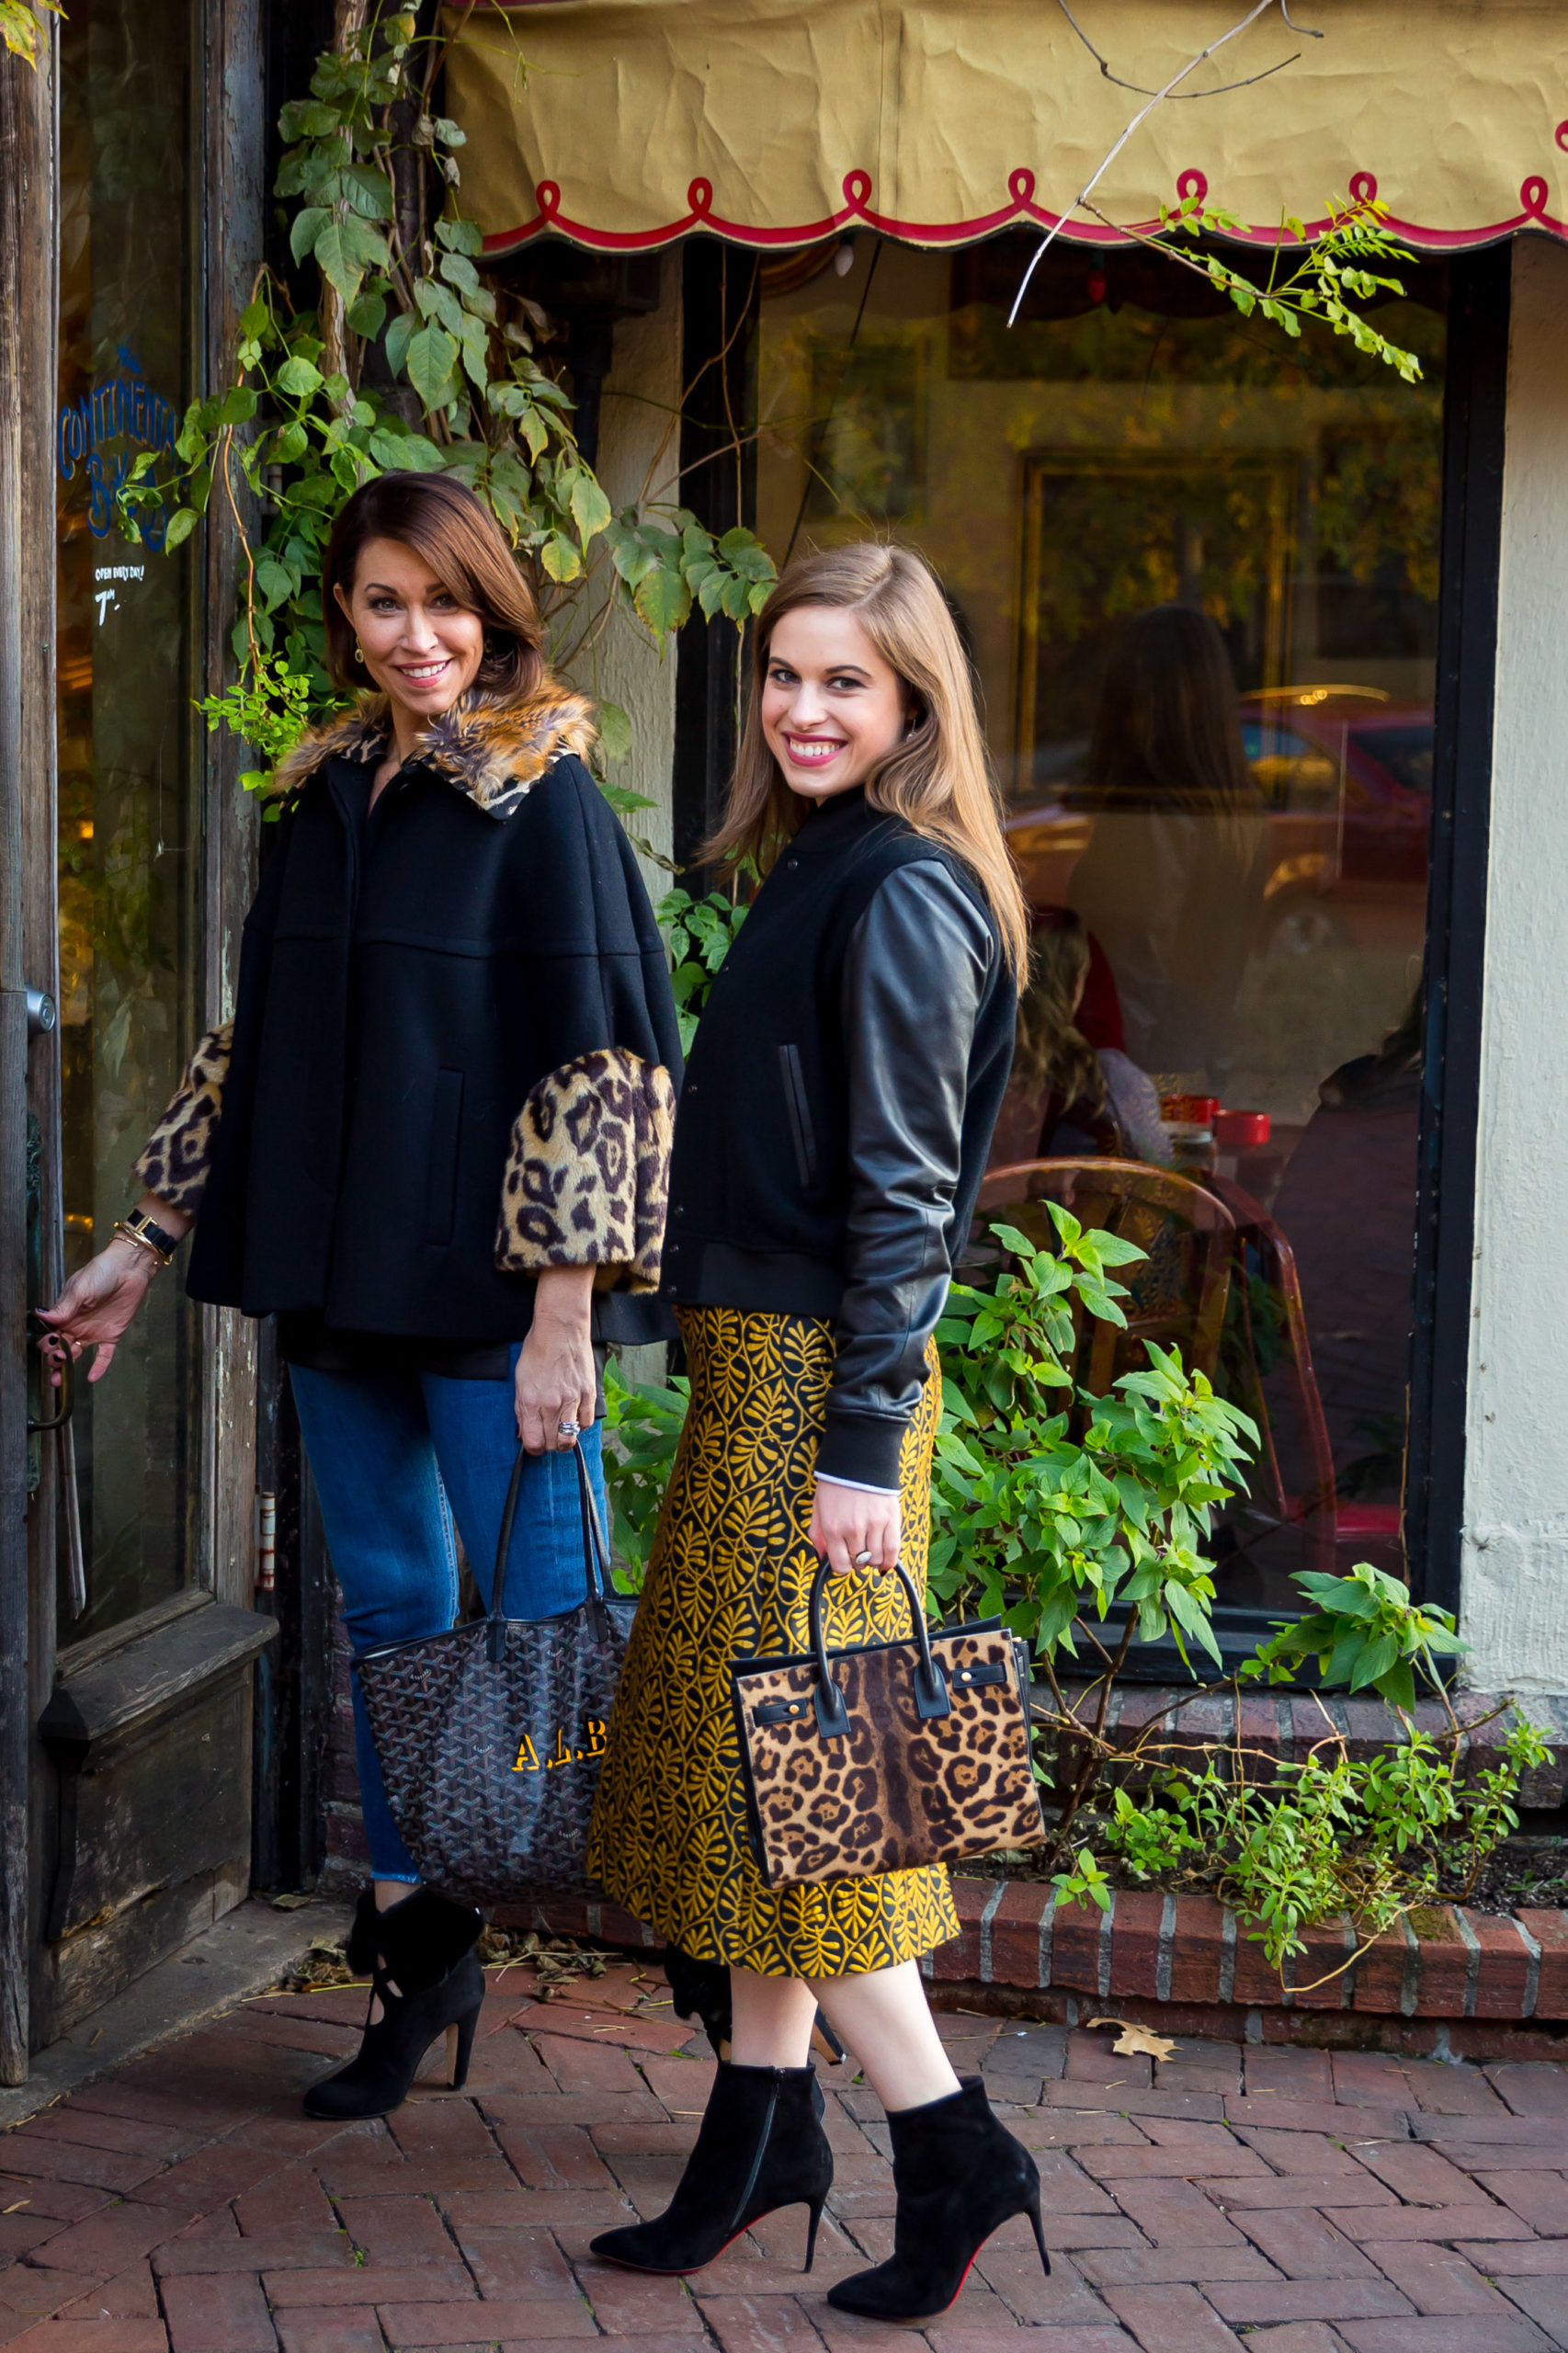 Two women with brown hair in fall outfits smiling at each other